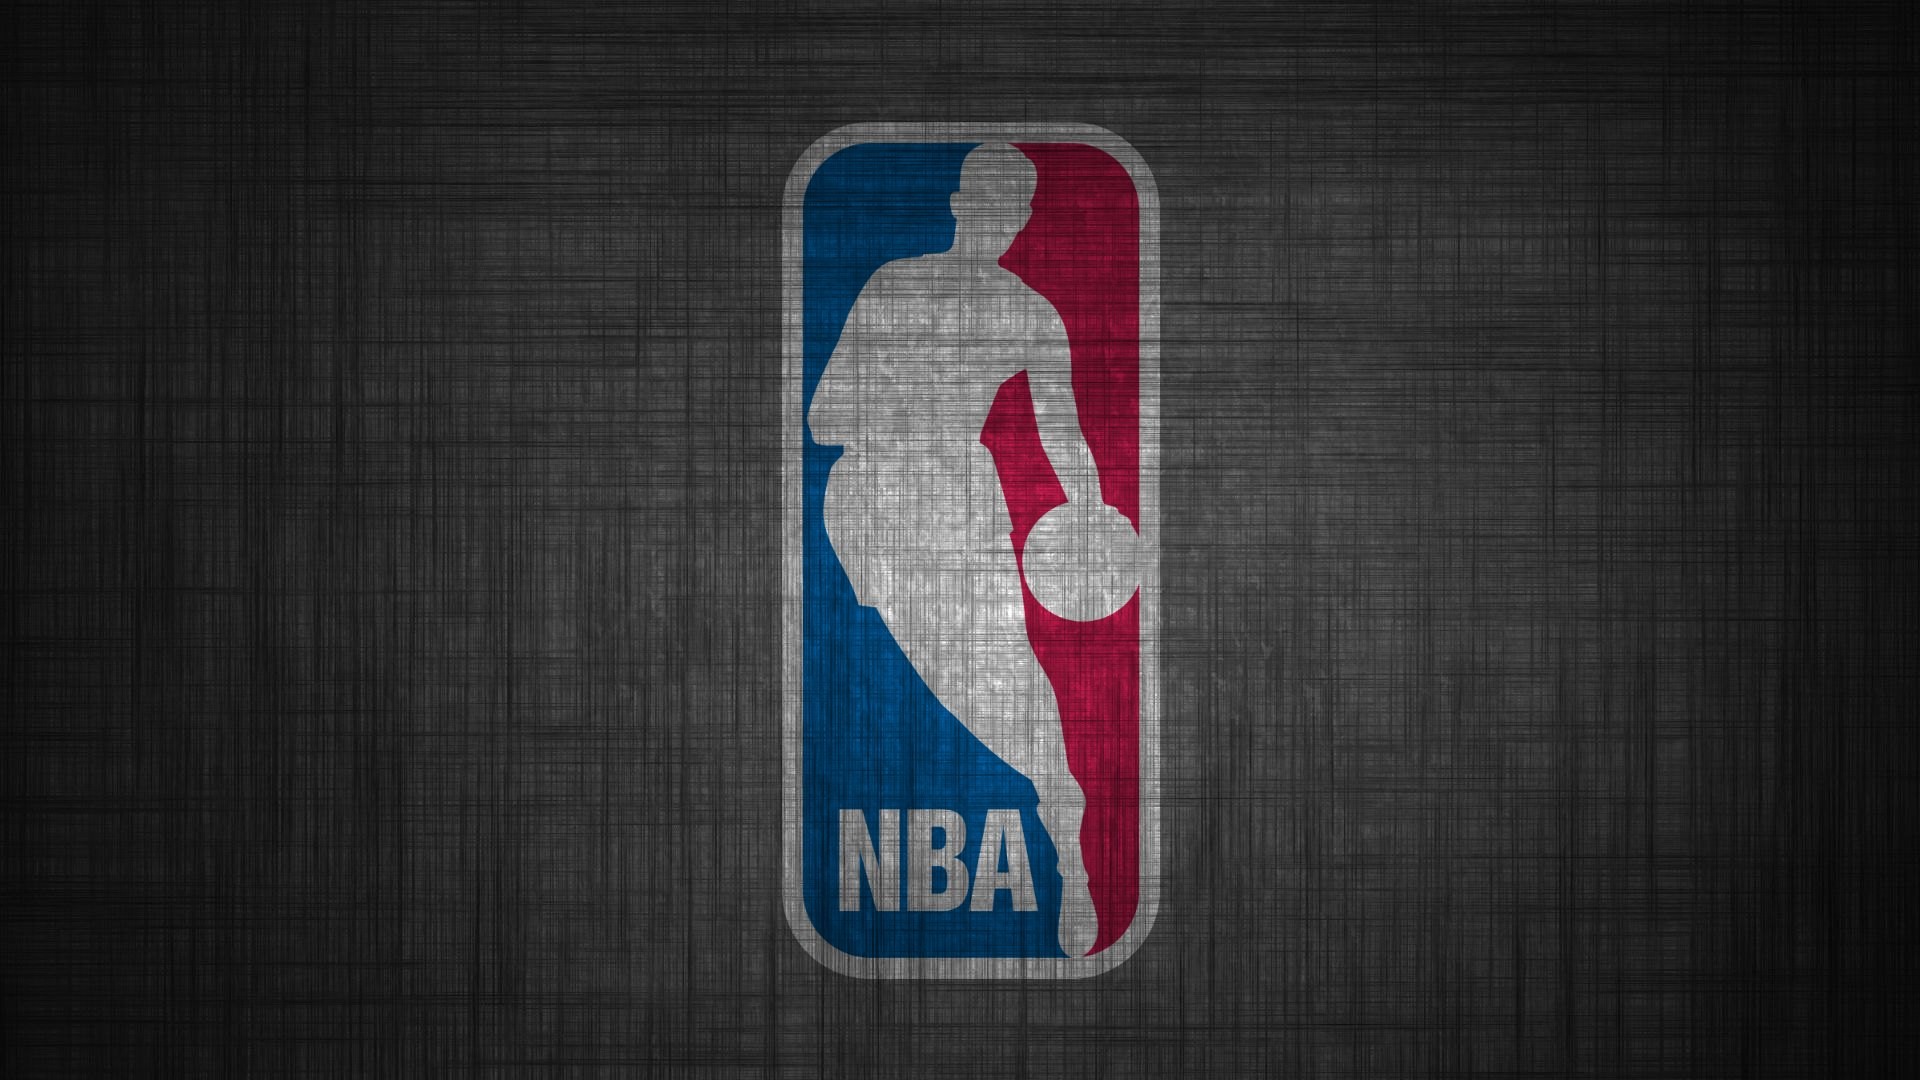 NBA For Desktop Wallpaper with image dimensions 1920x1080 pixel. You can make this wallpaper for your Desktop Computer Backgrounds, Windows or Mac Screensavers, iPhone Lock screen, Tablet or Android and another Mobile Phone device